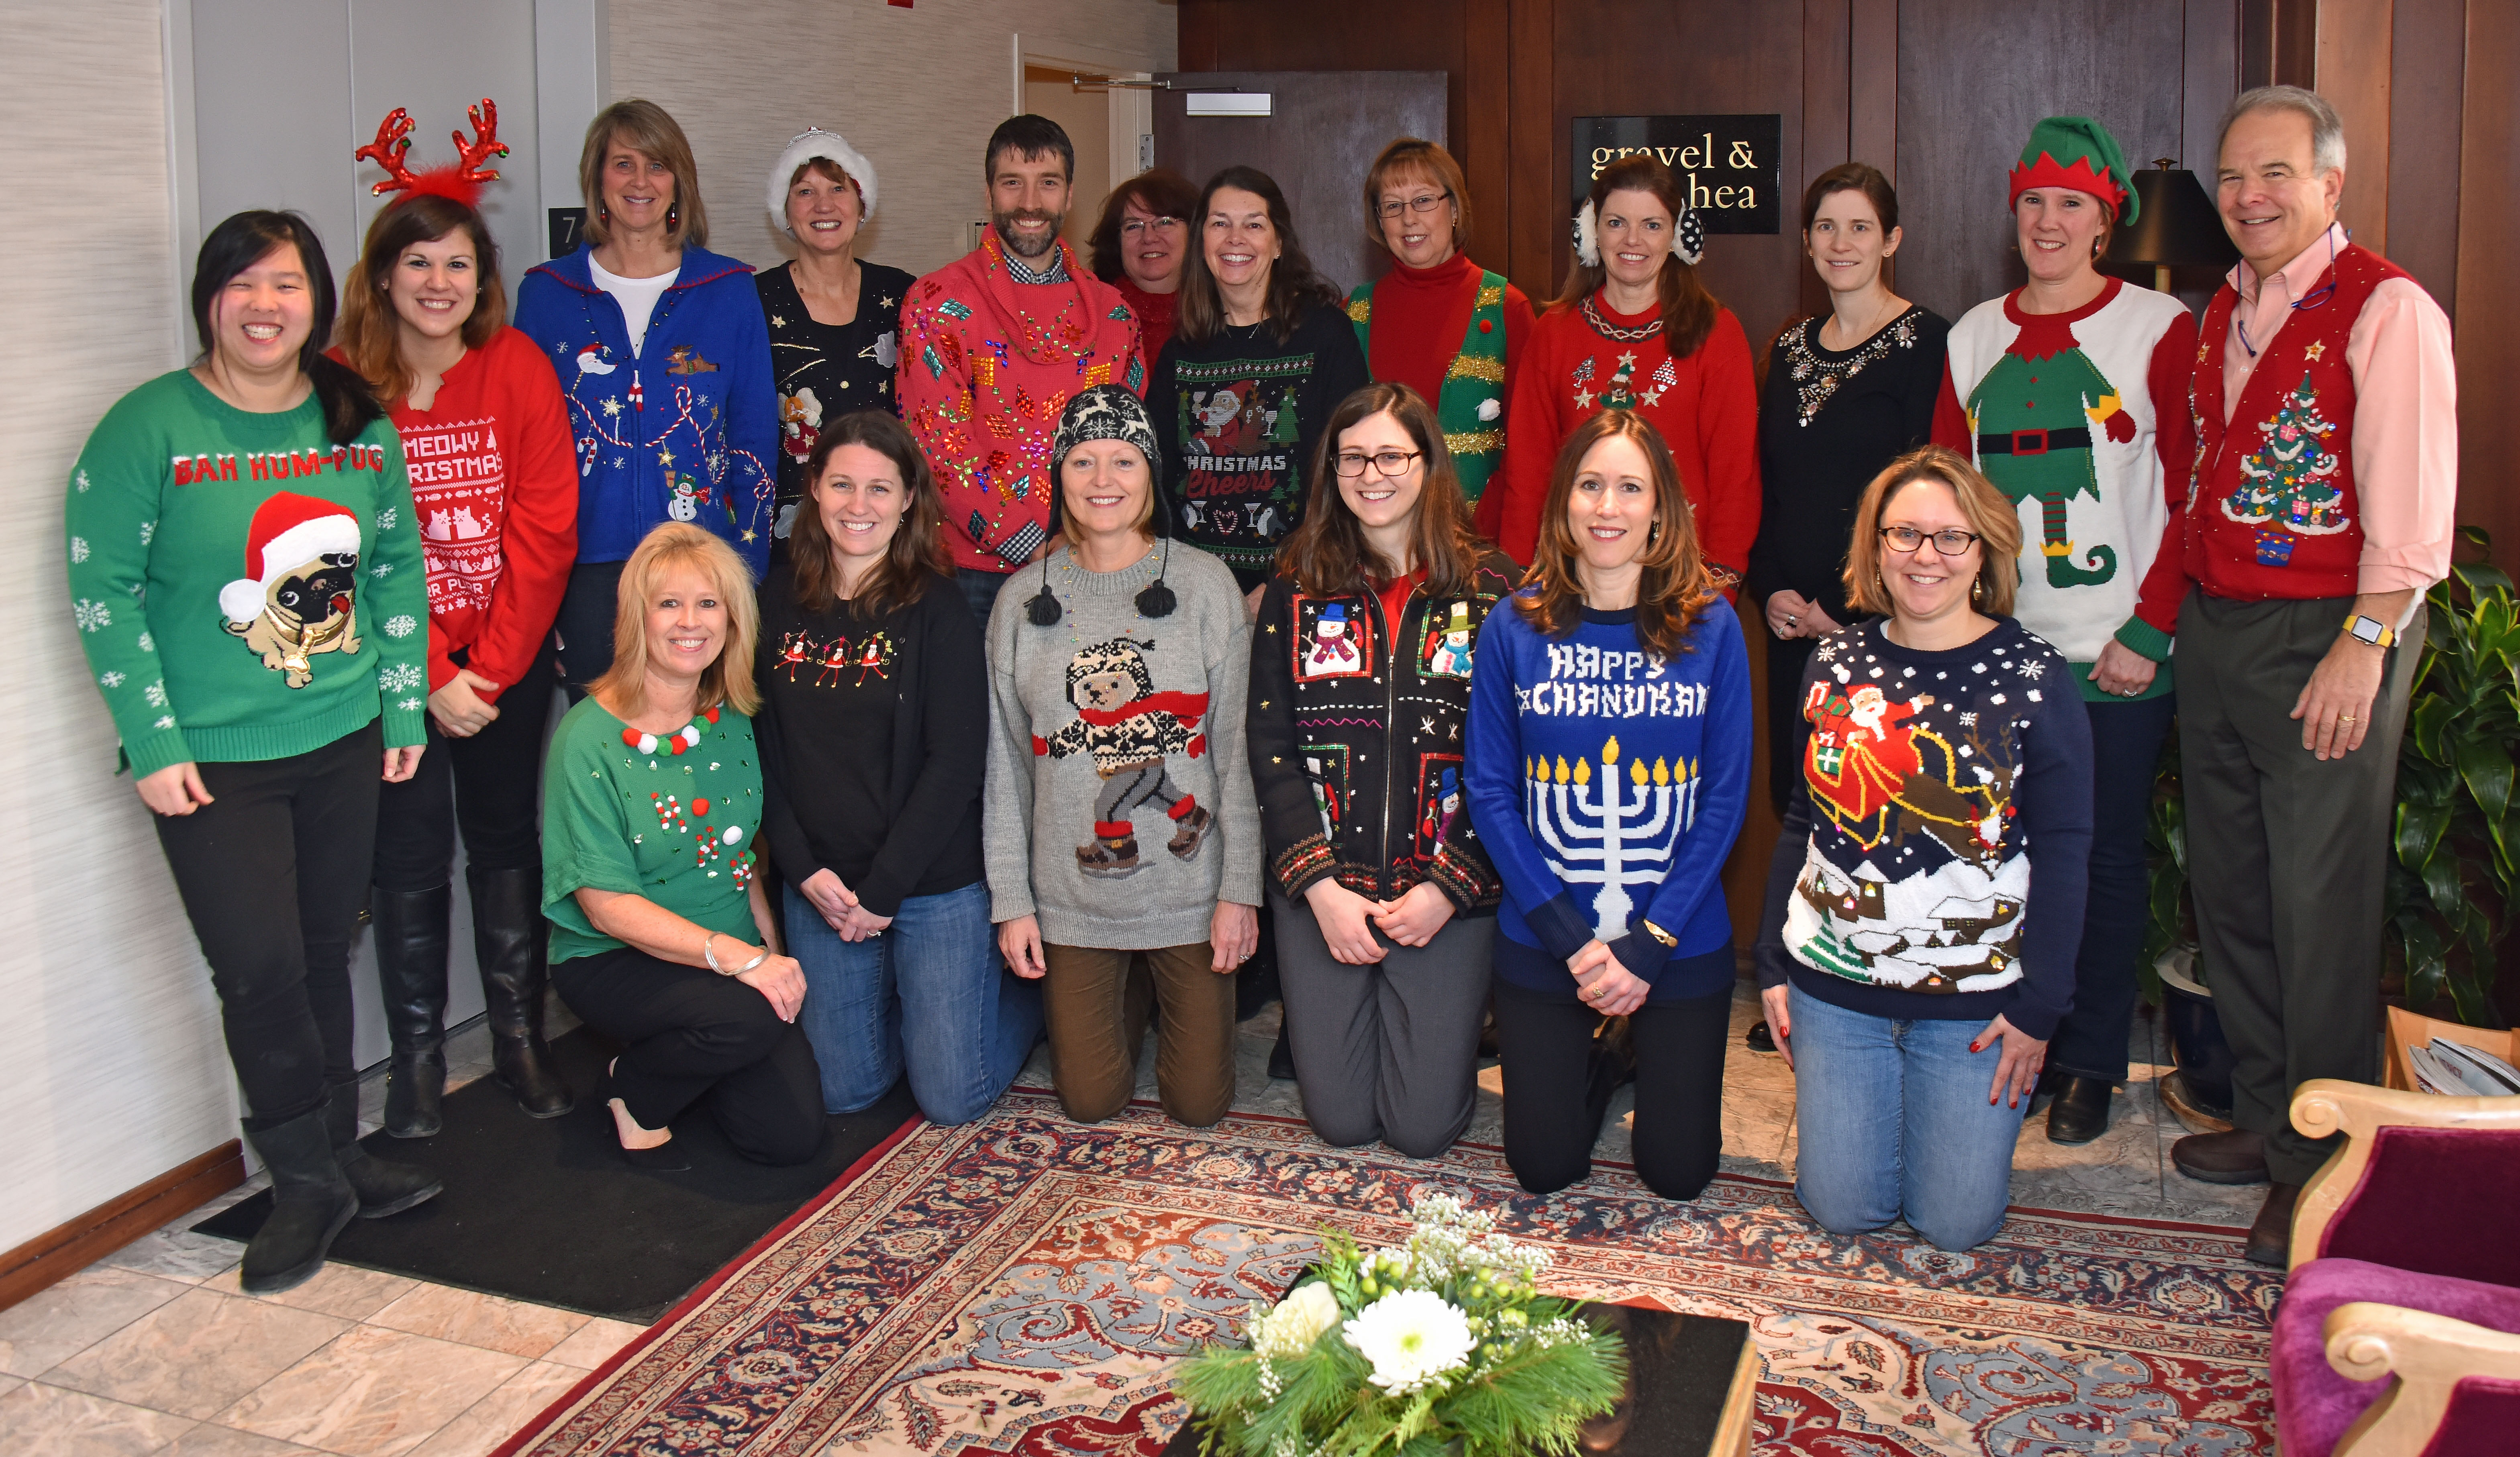 gravel-shea-ugly-sweater-contest